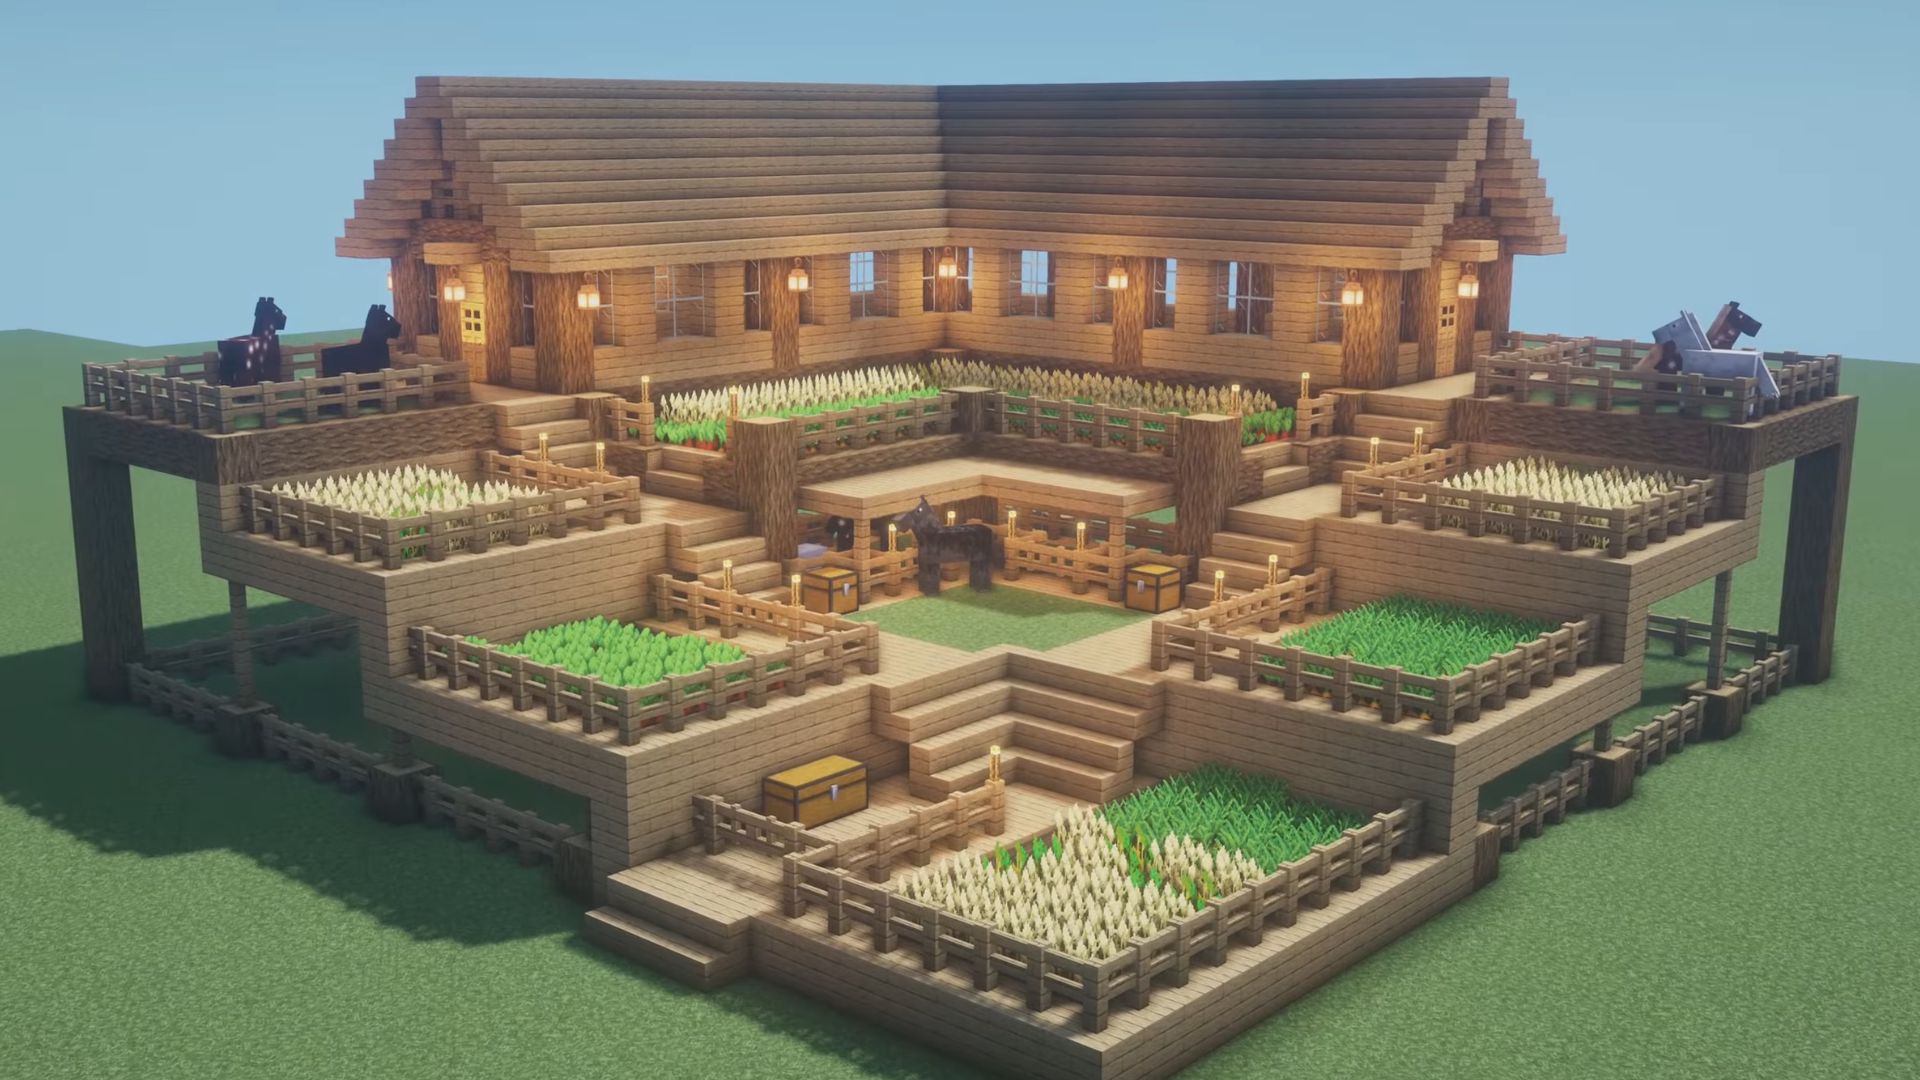 Minecraft House Designs Easy - 22 Cool Minecraft House Ideas Easy For Modern And Survival Style / It's all thanks to its solid gameplay, creation engine, and its amazing community.